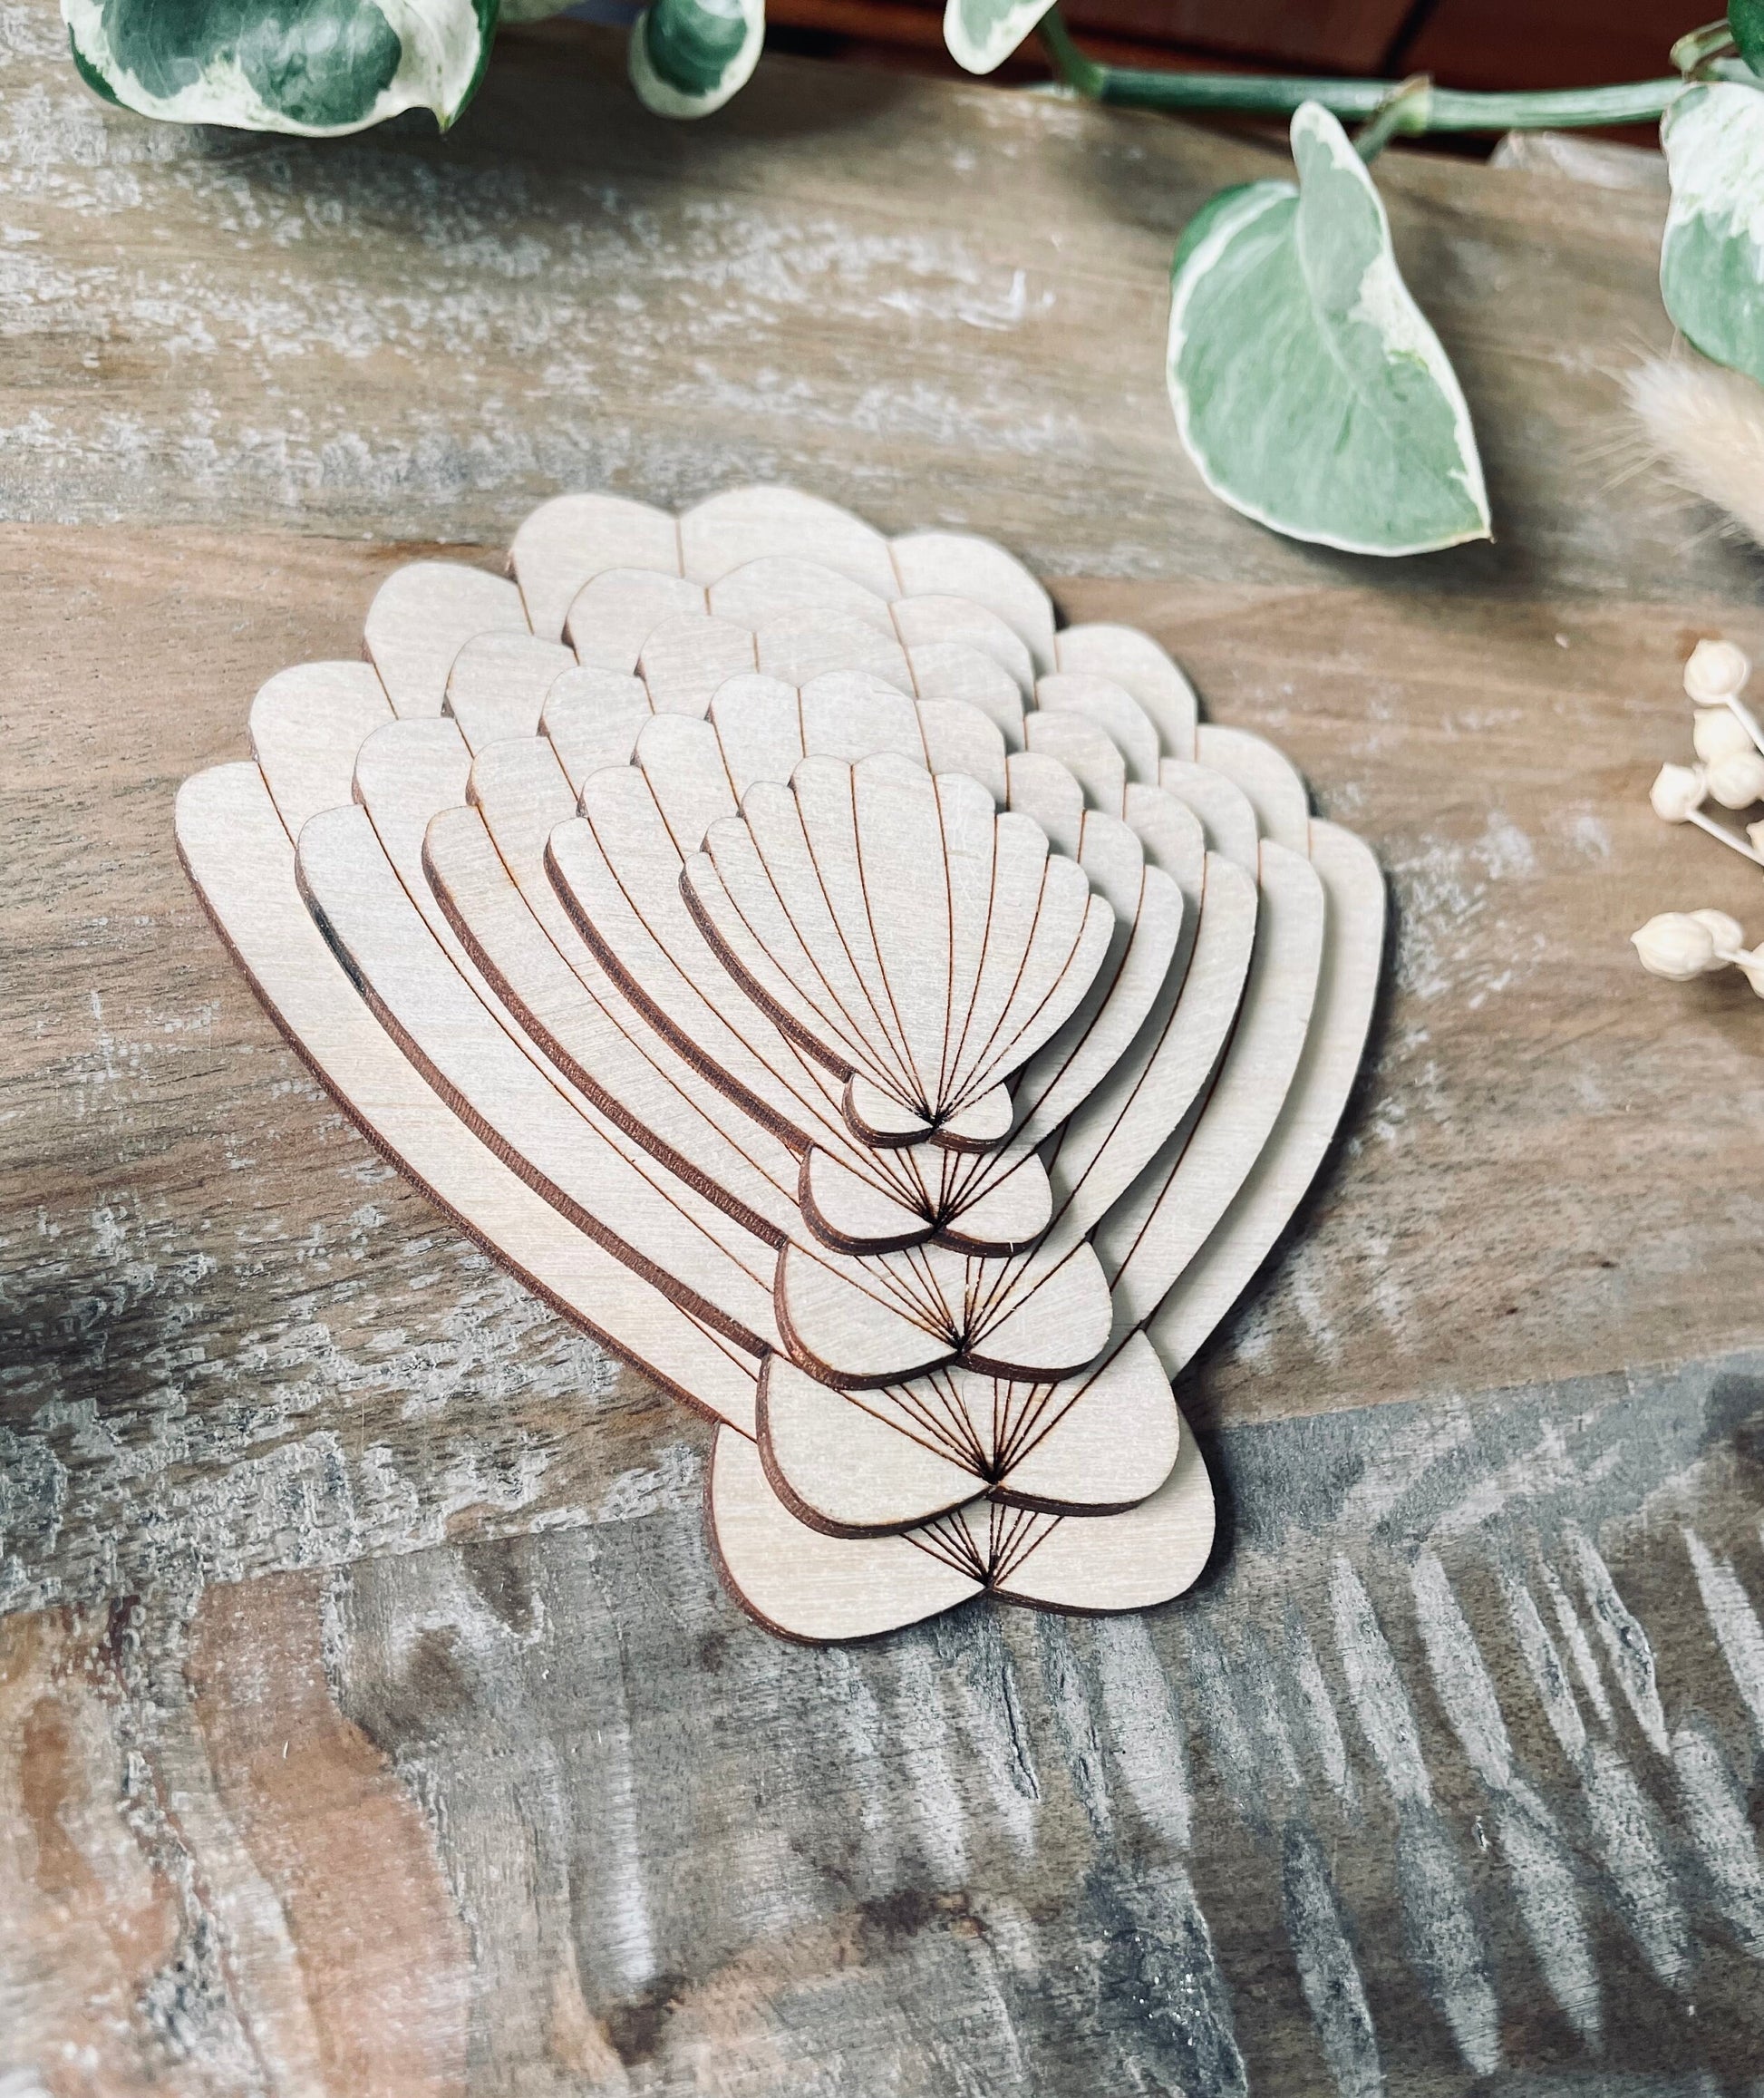 10x Wooden Seashell Shapes from 40mm Tall | 3mm Thick Laser Cut Plywood Blanks | Craft Shapes